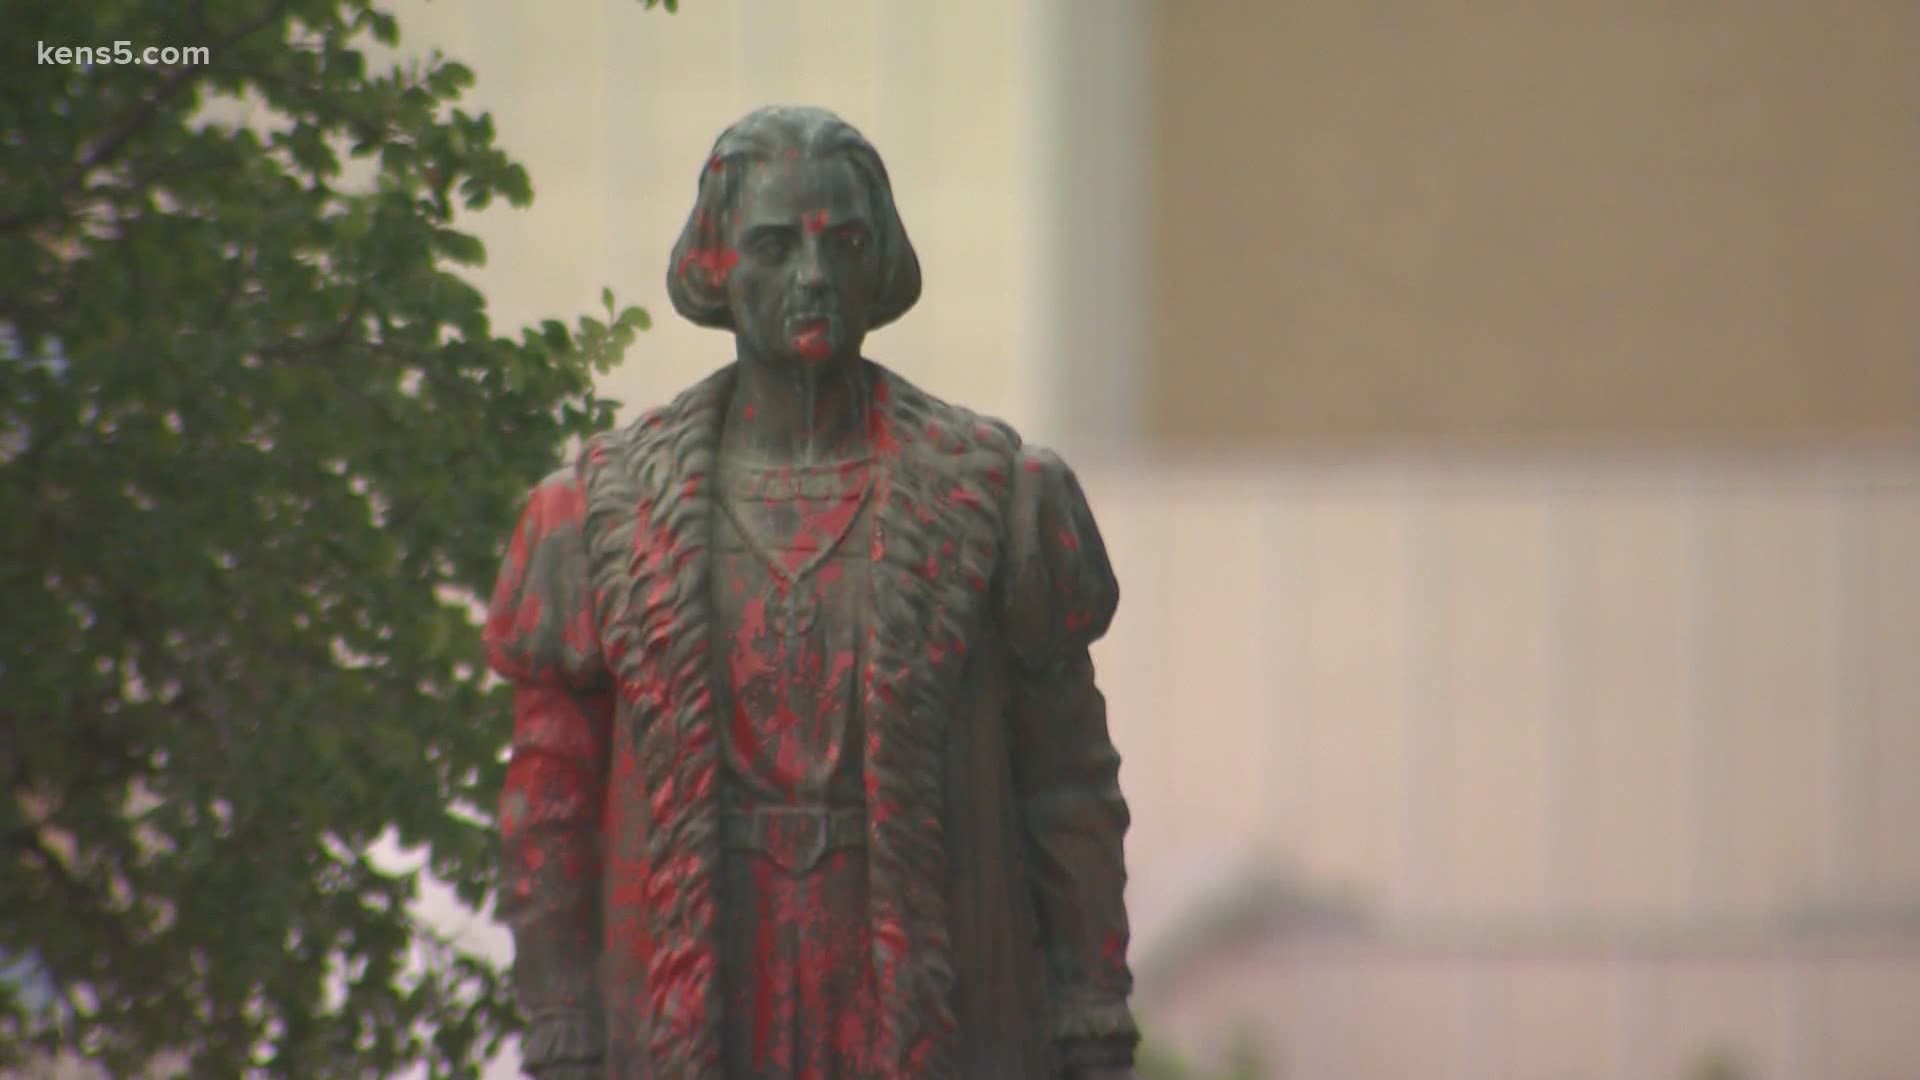 City Council members have voted to permanently remove a statue of Christopher Columbus from a downtown park